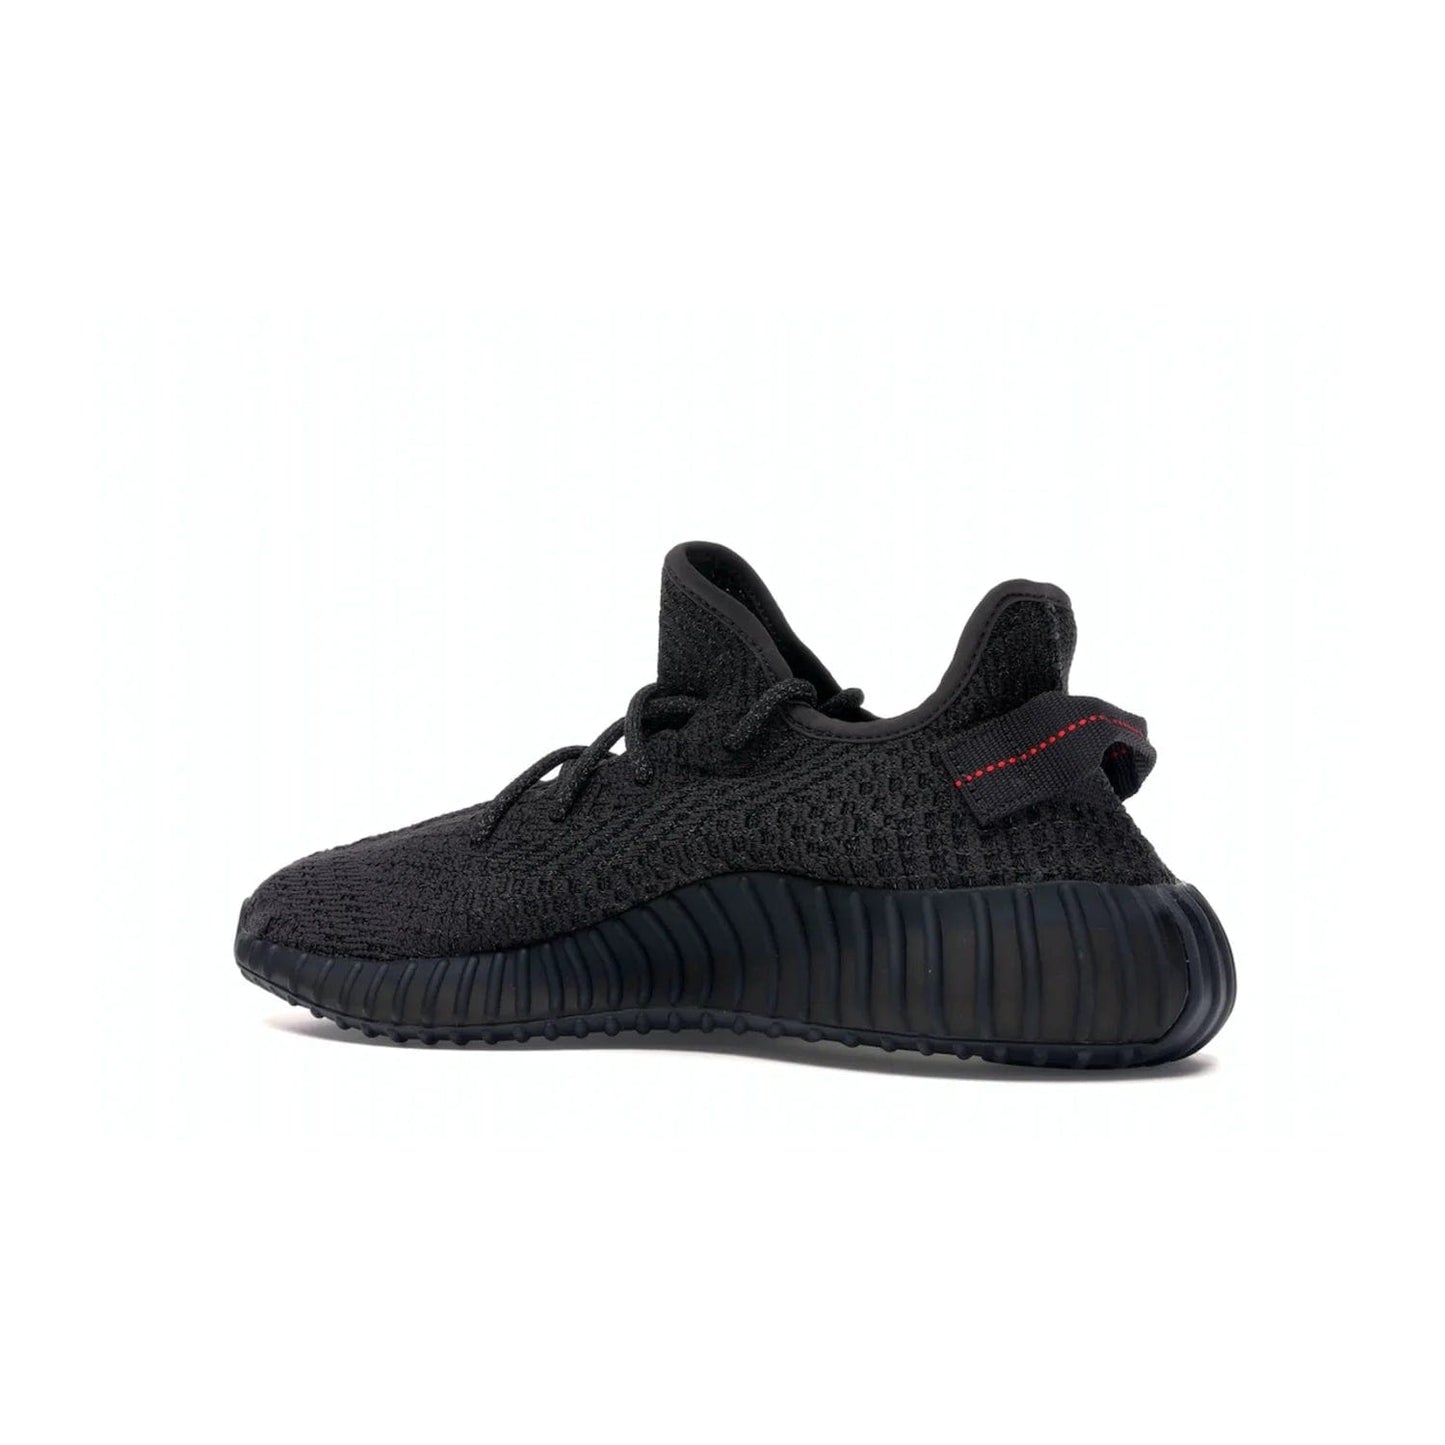 adidas Yeezy Boost 350 V2 Static Black (Reflective) - Image 22 - Only at www.BallersClubKickz.com - Make a statement with the adidas Yeezy Boost 350 V2 Static Black Reflective. All-black upper, reflective accents, midsole, and sole combine for a stylish look. High quality materials. June 2019 release. Add to your collection today.